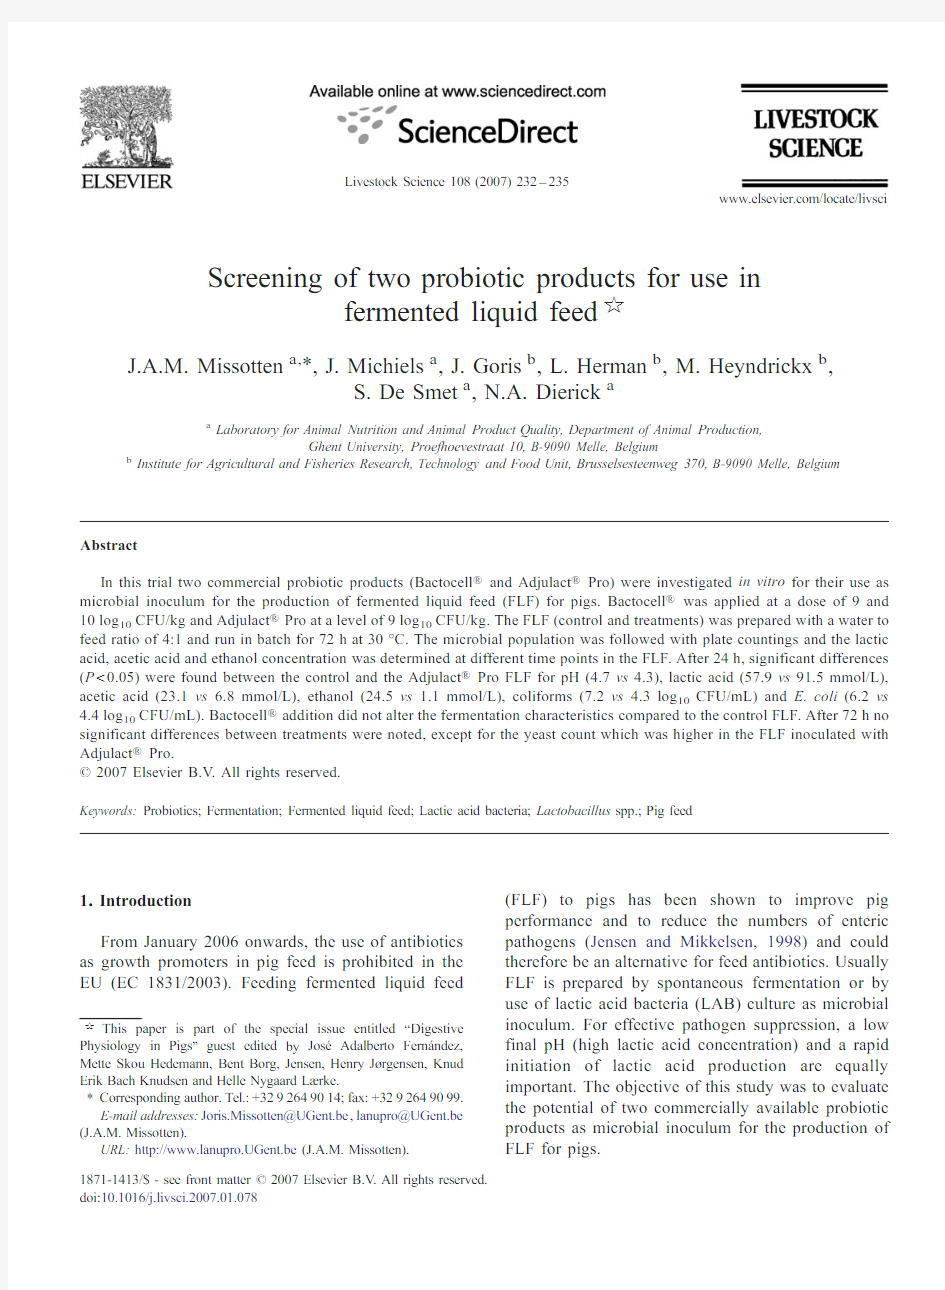 Screening of two probiotic products for use in fermented liquid feed